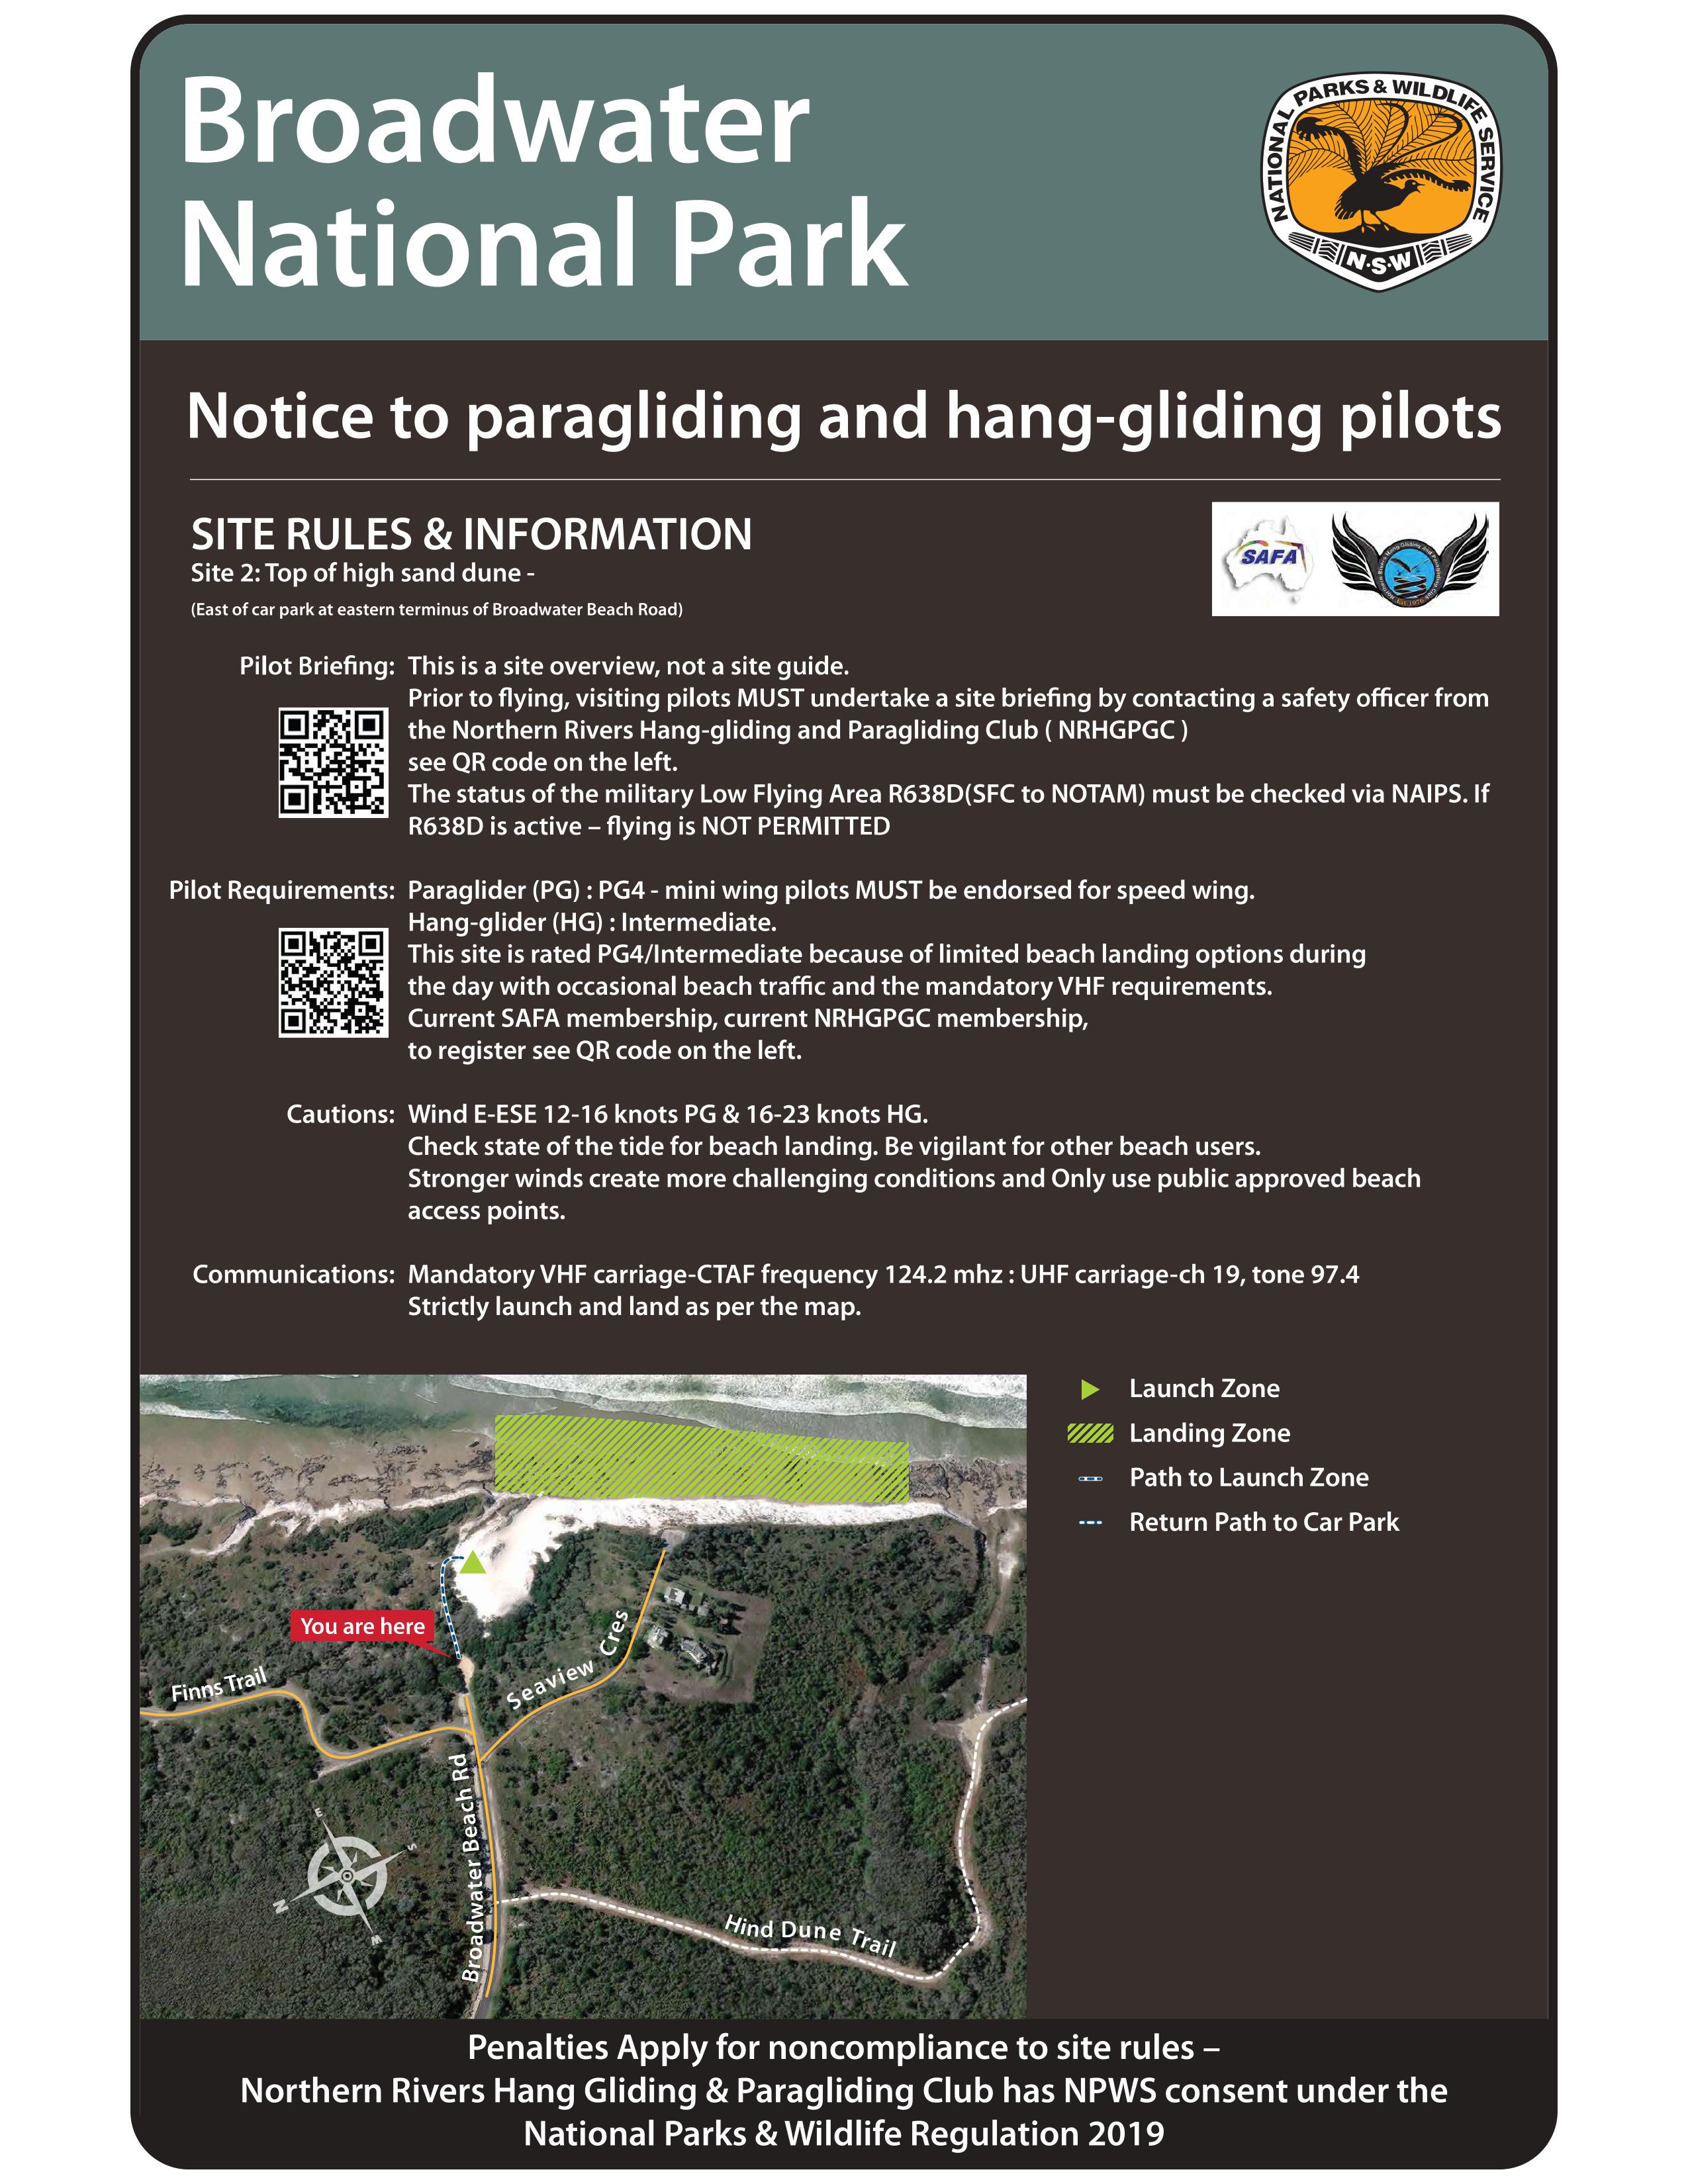 Broadwater NP Site 2 Rules and Information